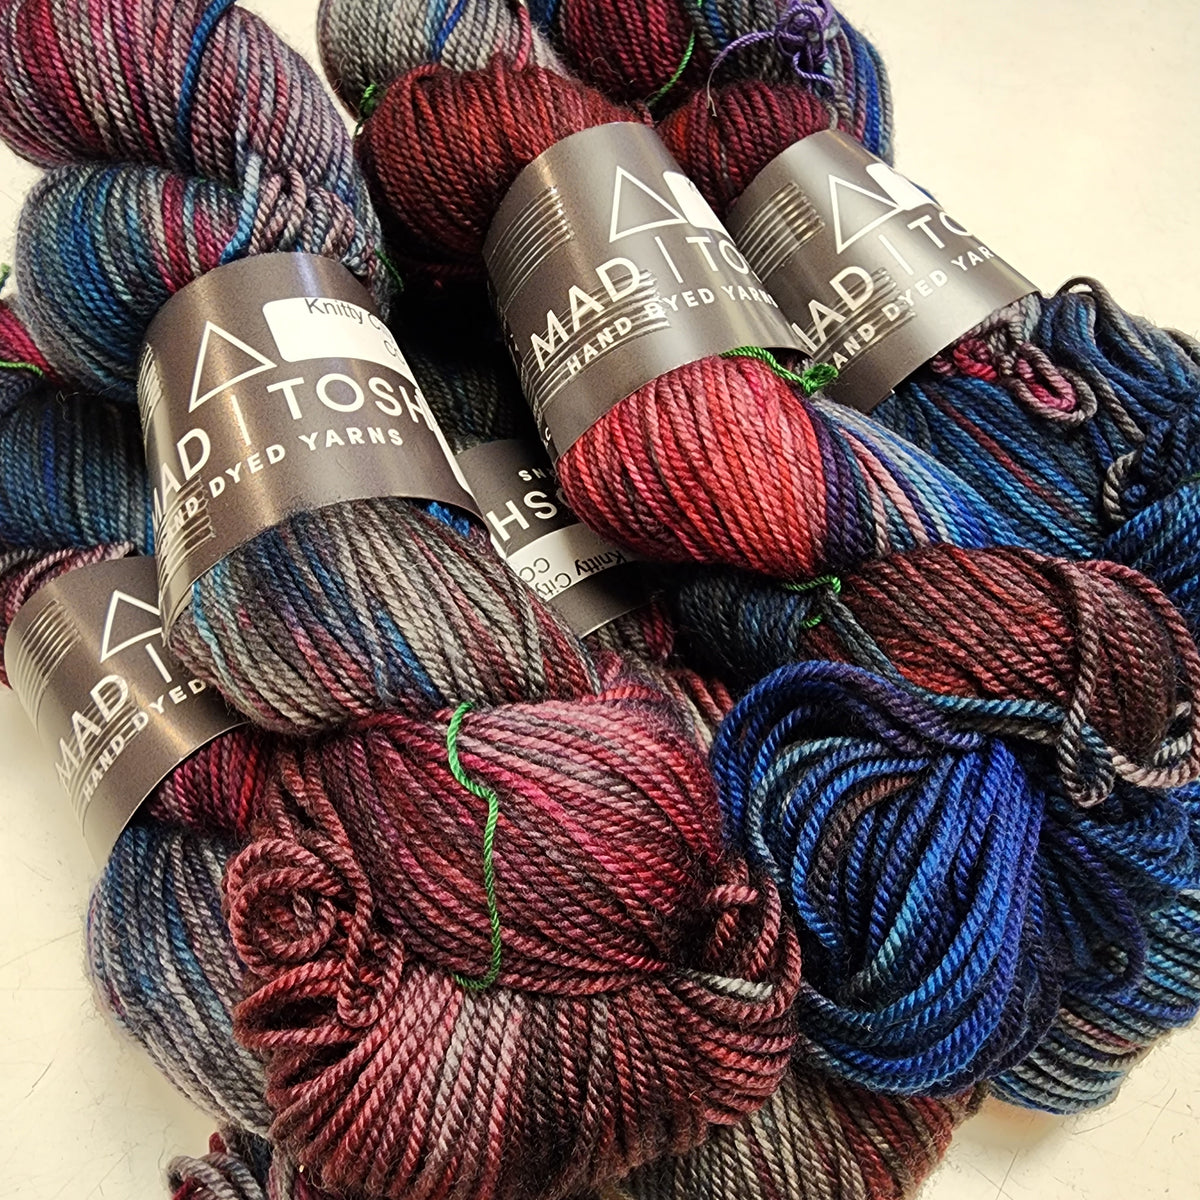 Madelinetosh Tosh Sport Knitty City Exclusives